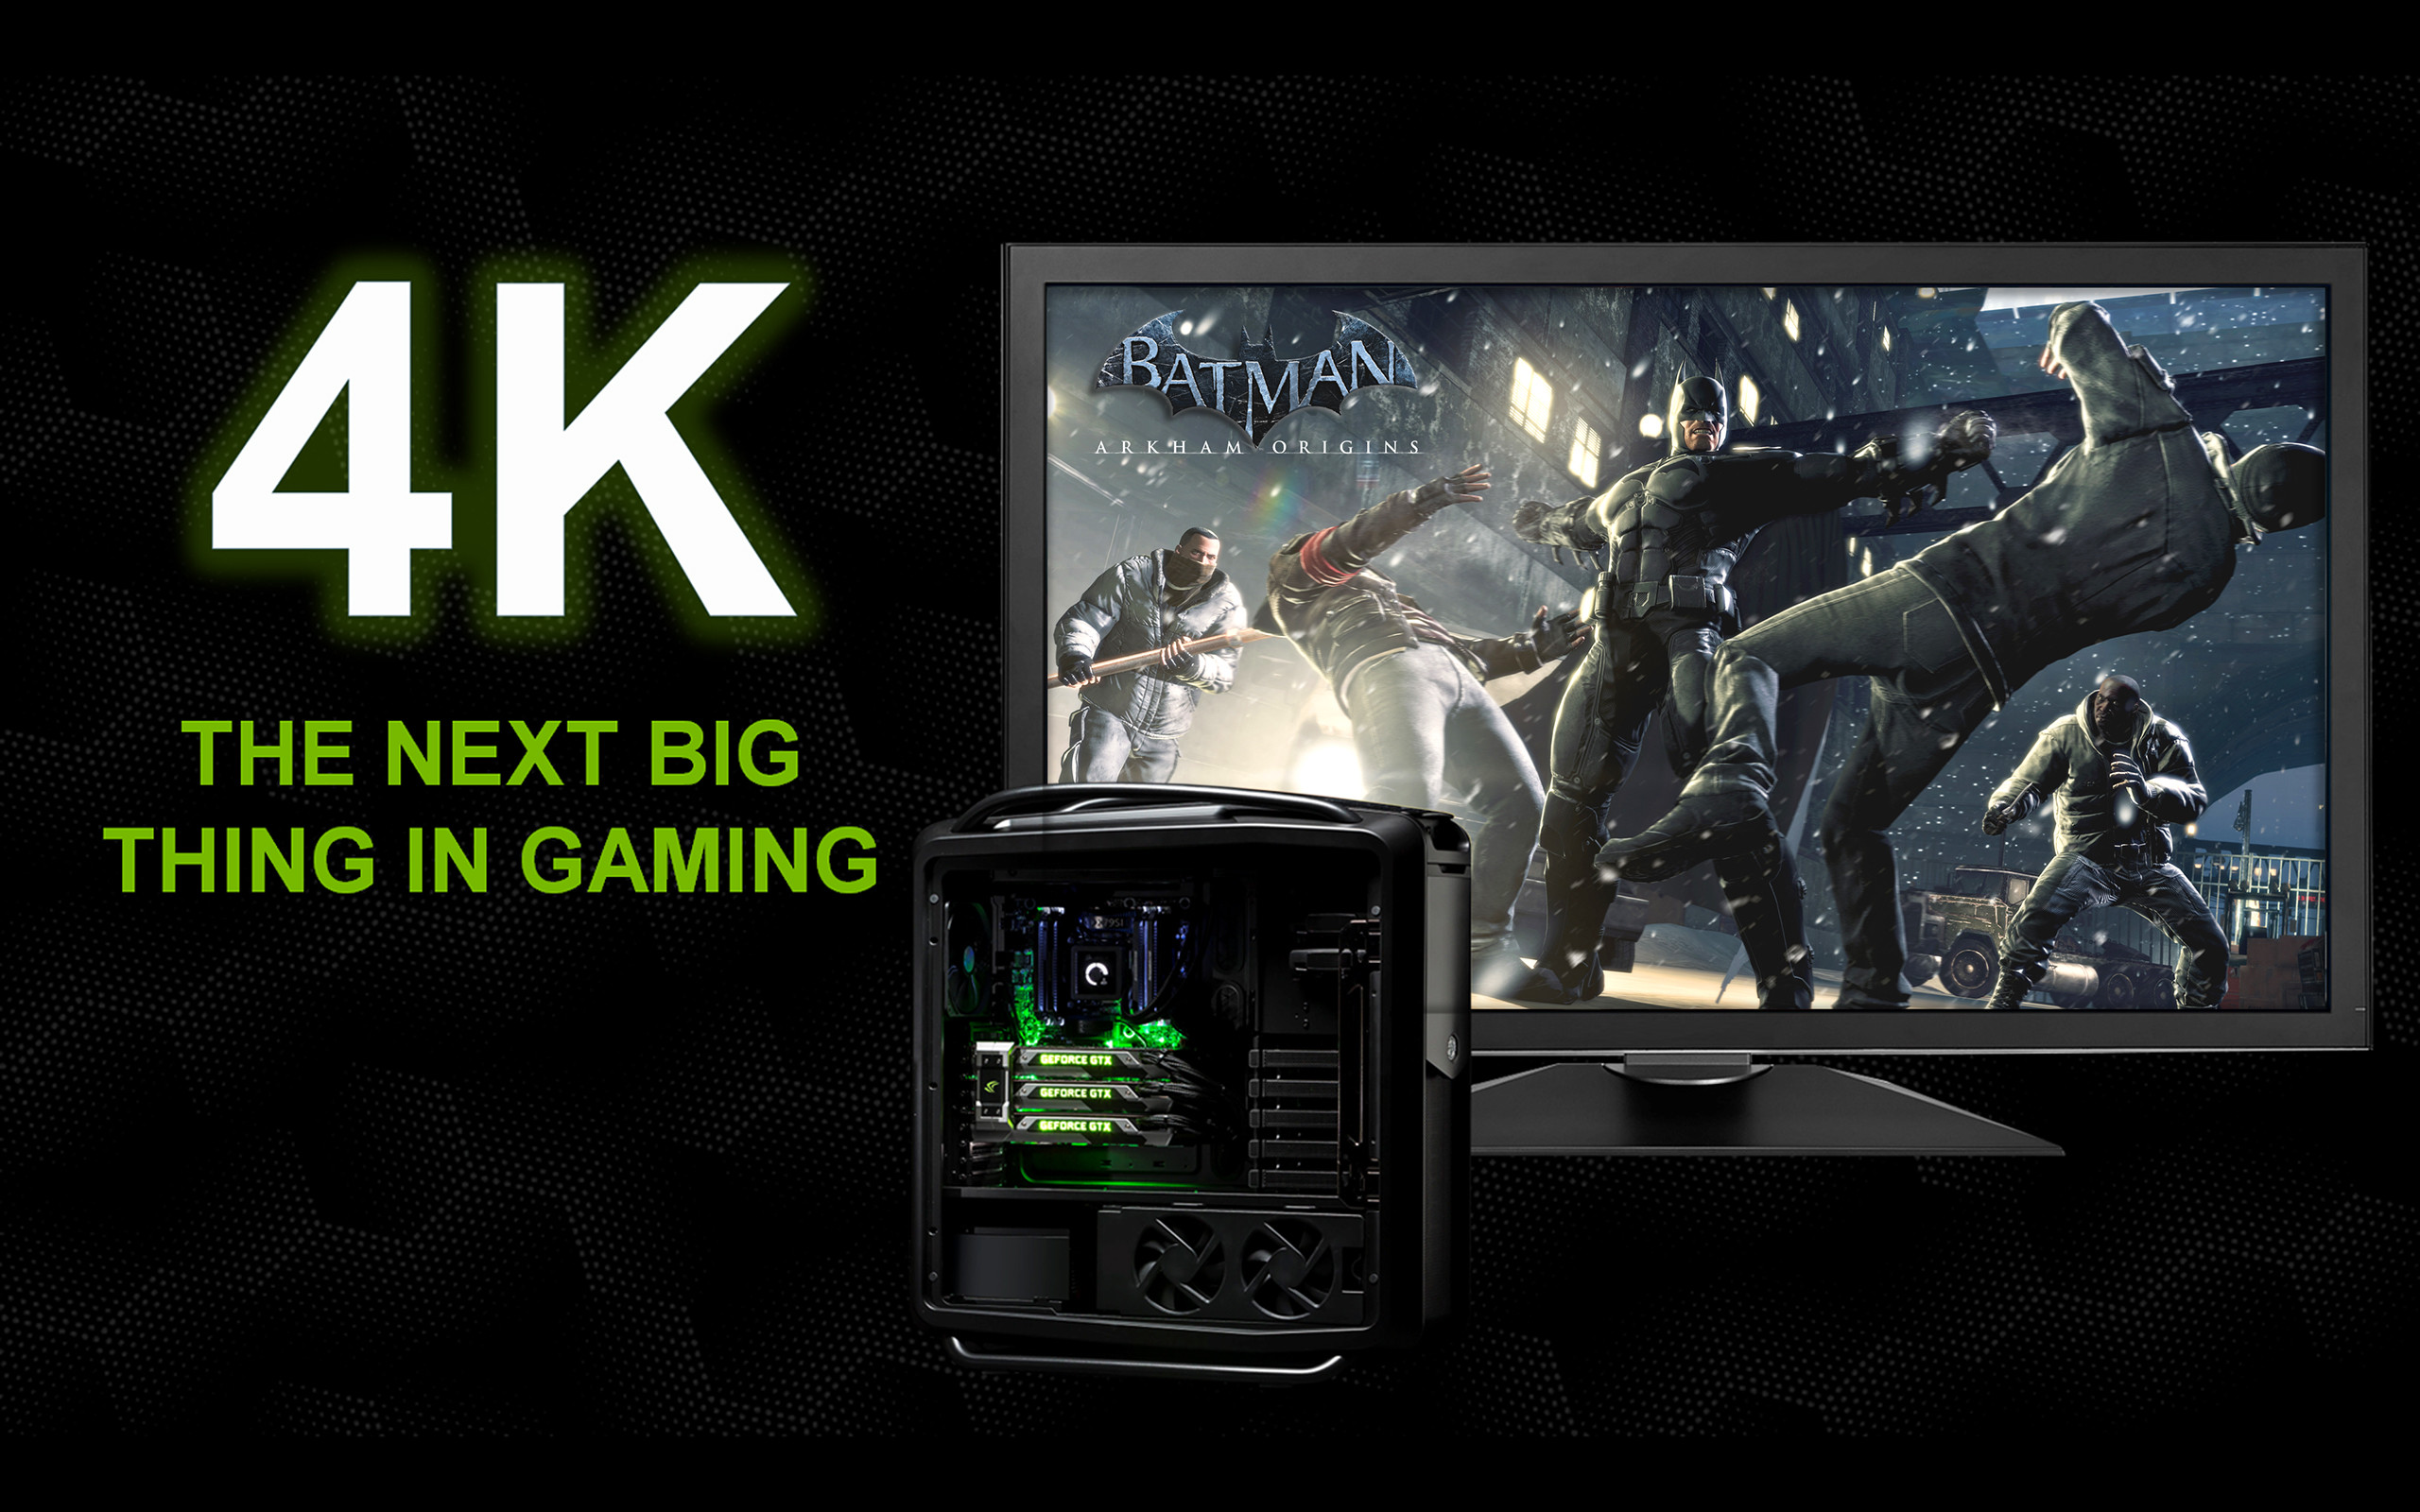 Batman Arkham Origins is ready for 4K. Are you